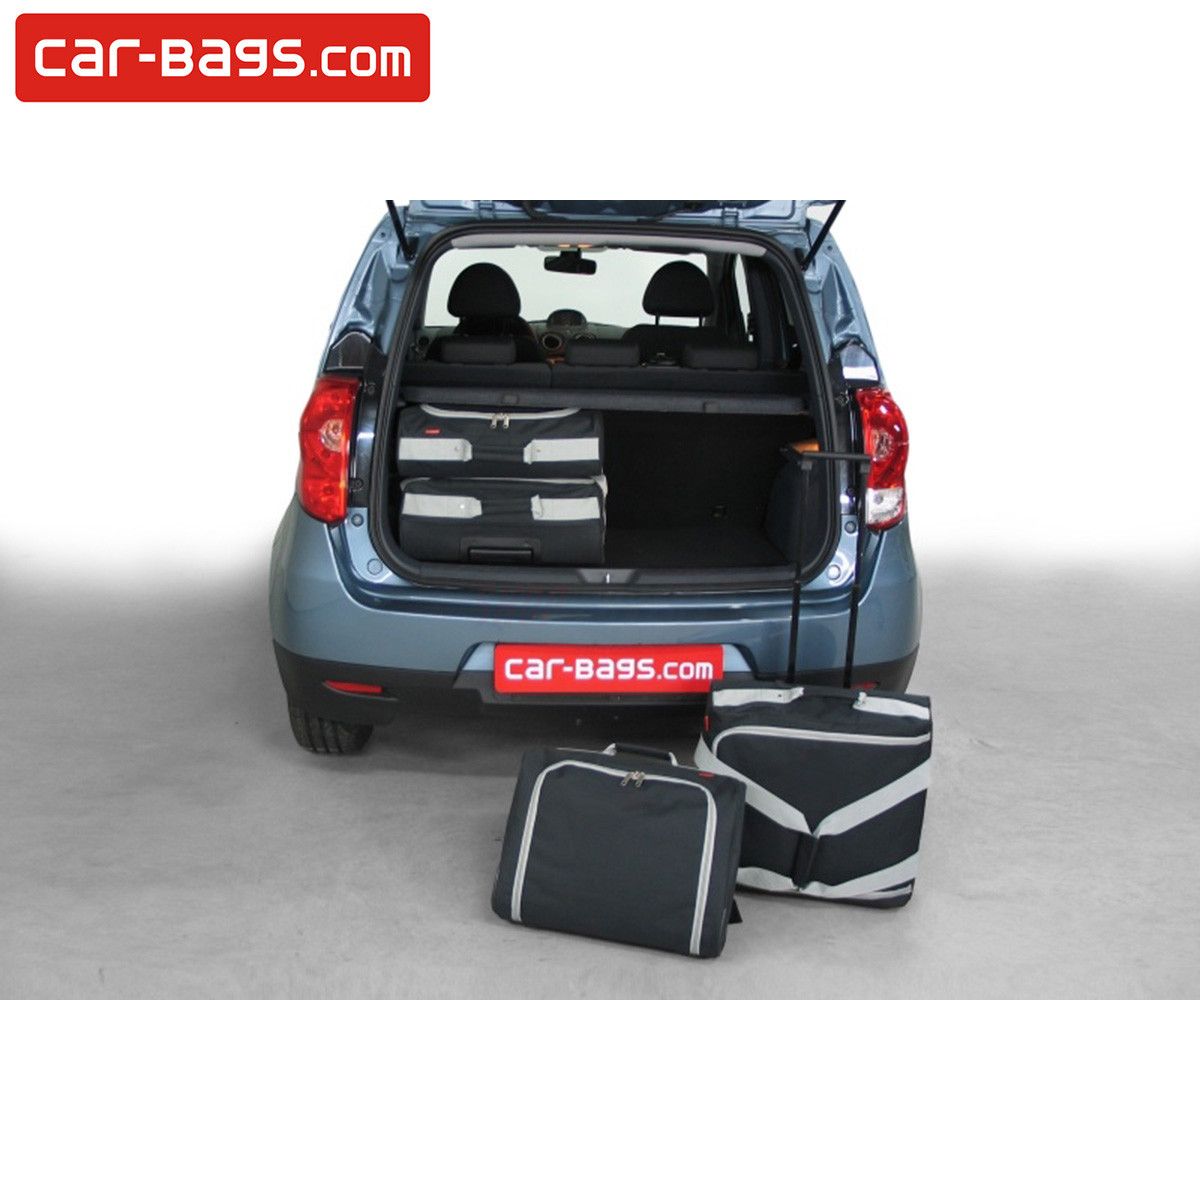 Travel bags fits Opel Corsa E tailor made (4 bags), Time and space saving  for $ 275, Perfect fit Car Bags